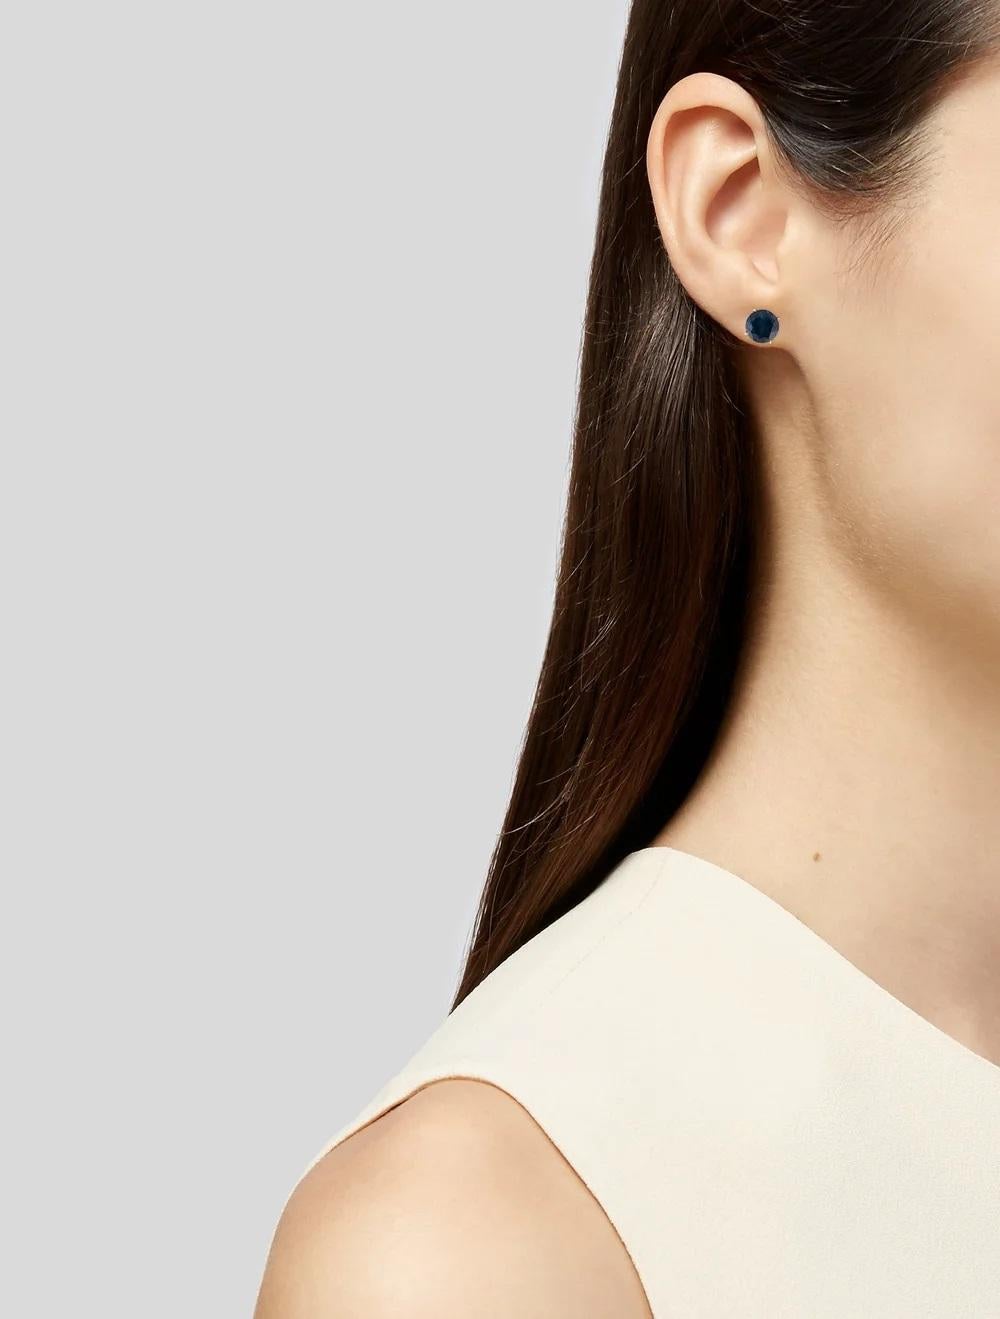 Discover timeless elegance with these stunning 14K Yellow Gold Sapphire Stud Earrings. Crafted to perfection, these earrings feature two round brilliant sapphires, totaling 4.51 carats. The deep blue hue of the sapphires exudes sophistication, while